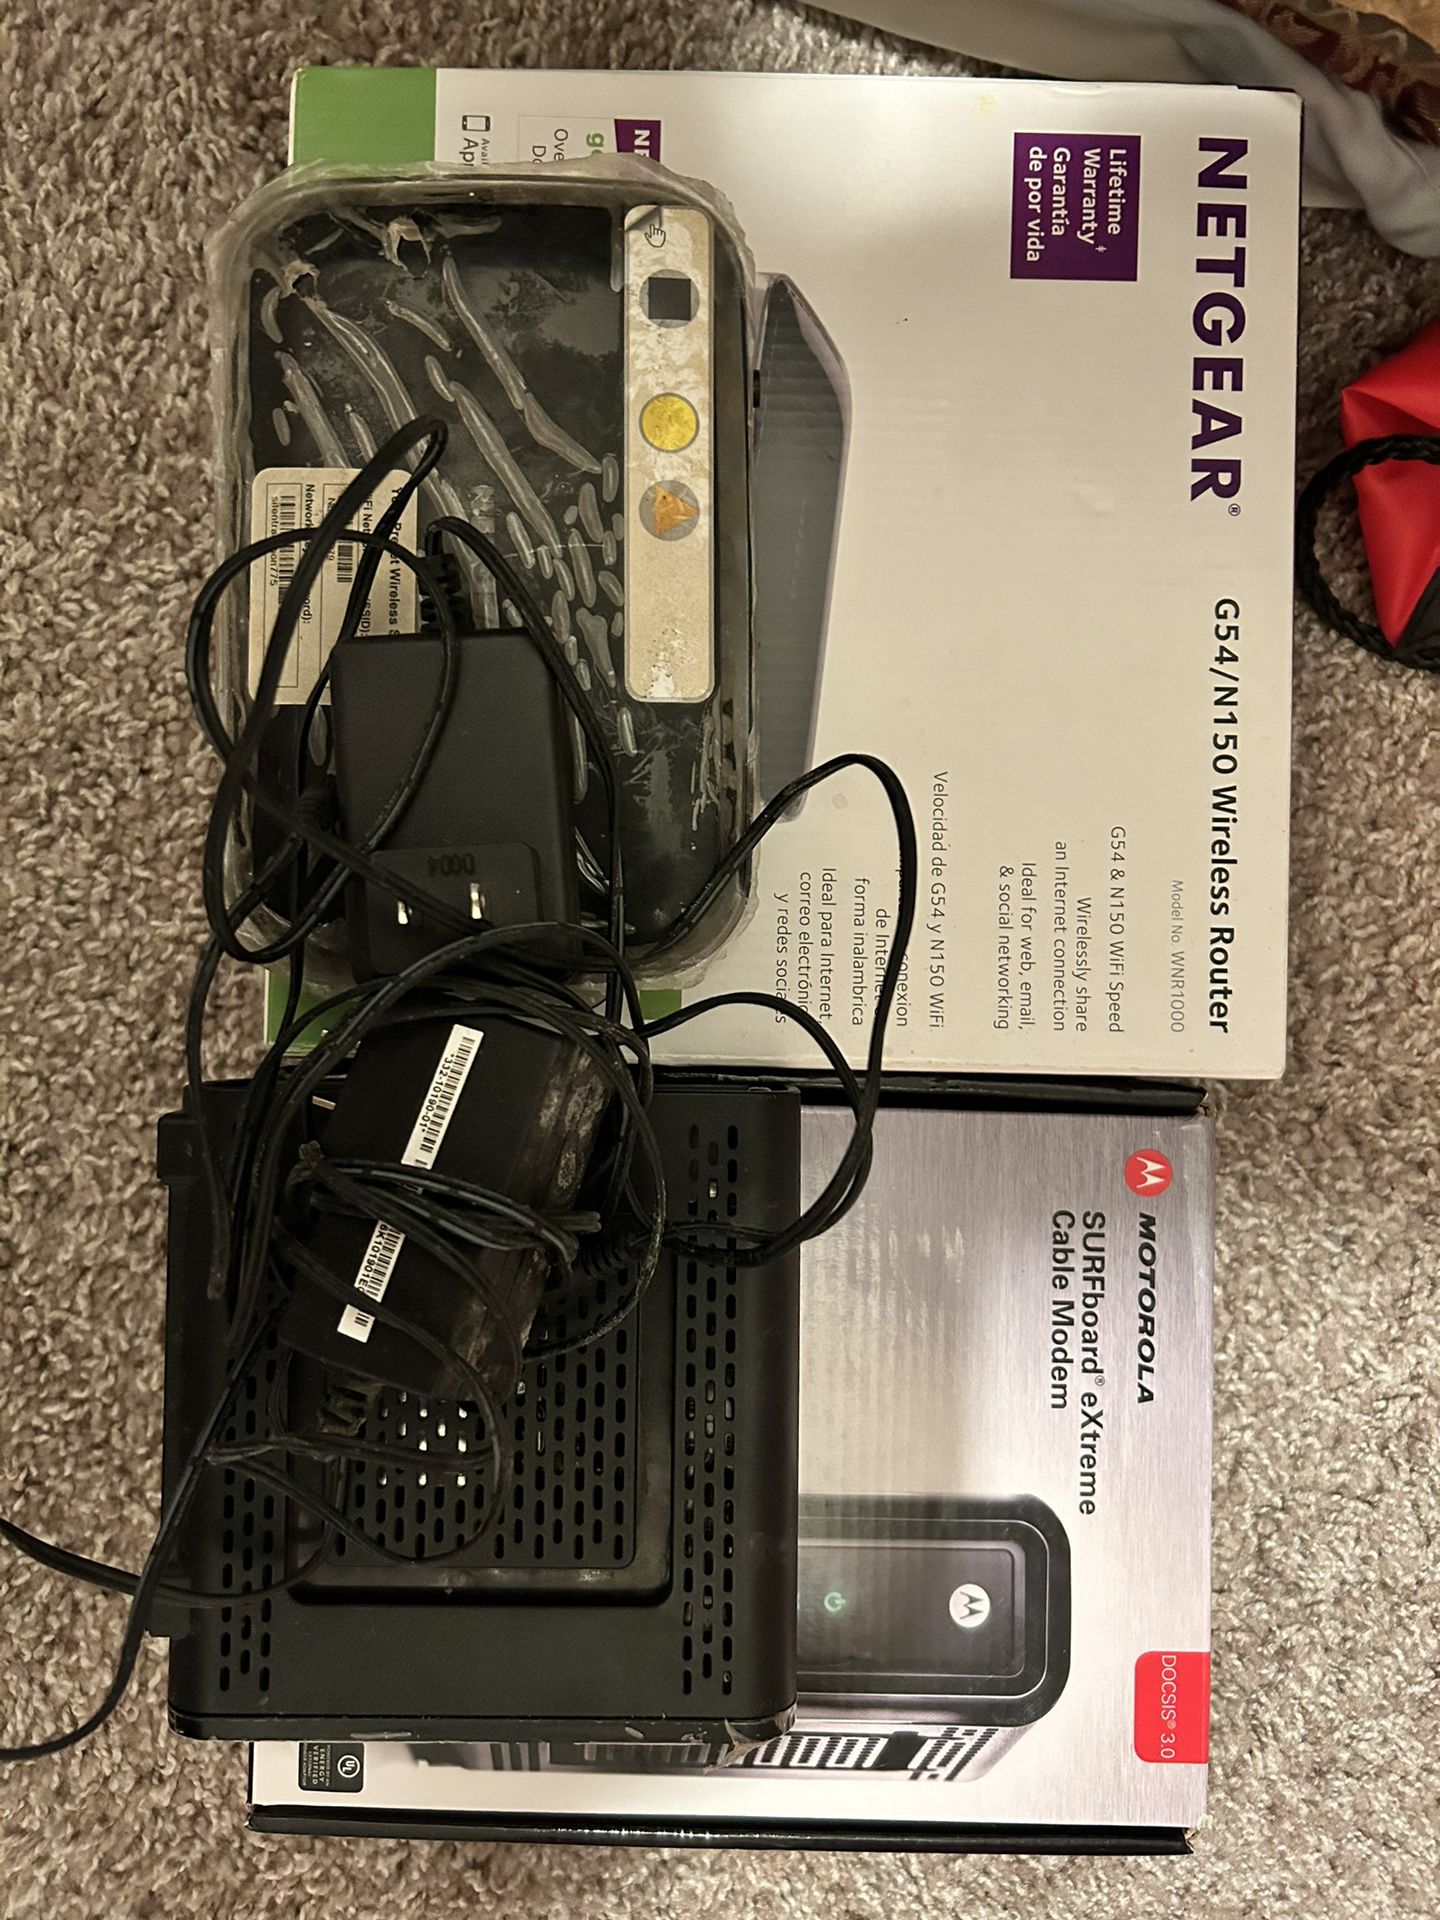 Motorola SURFboard Extreme Cable Modem And Netgear G54/N150 Router